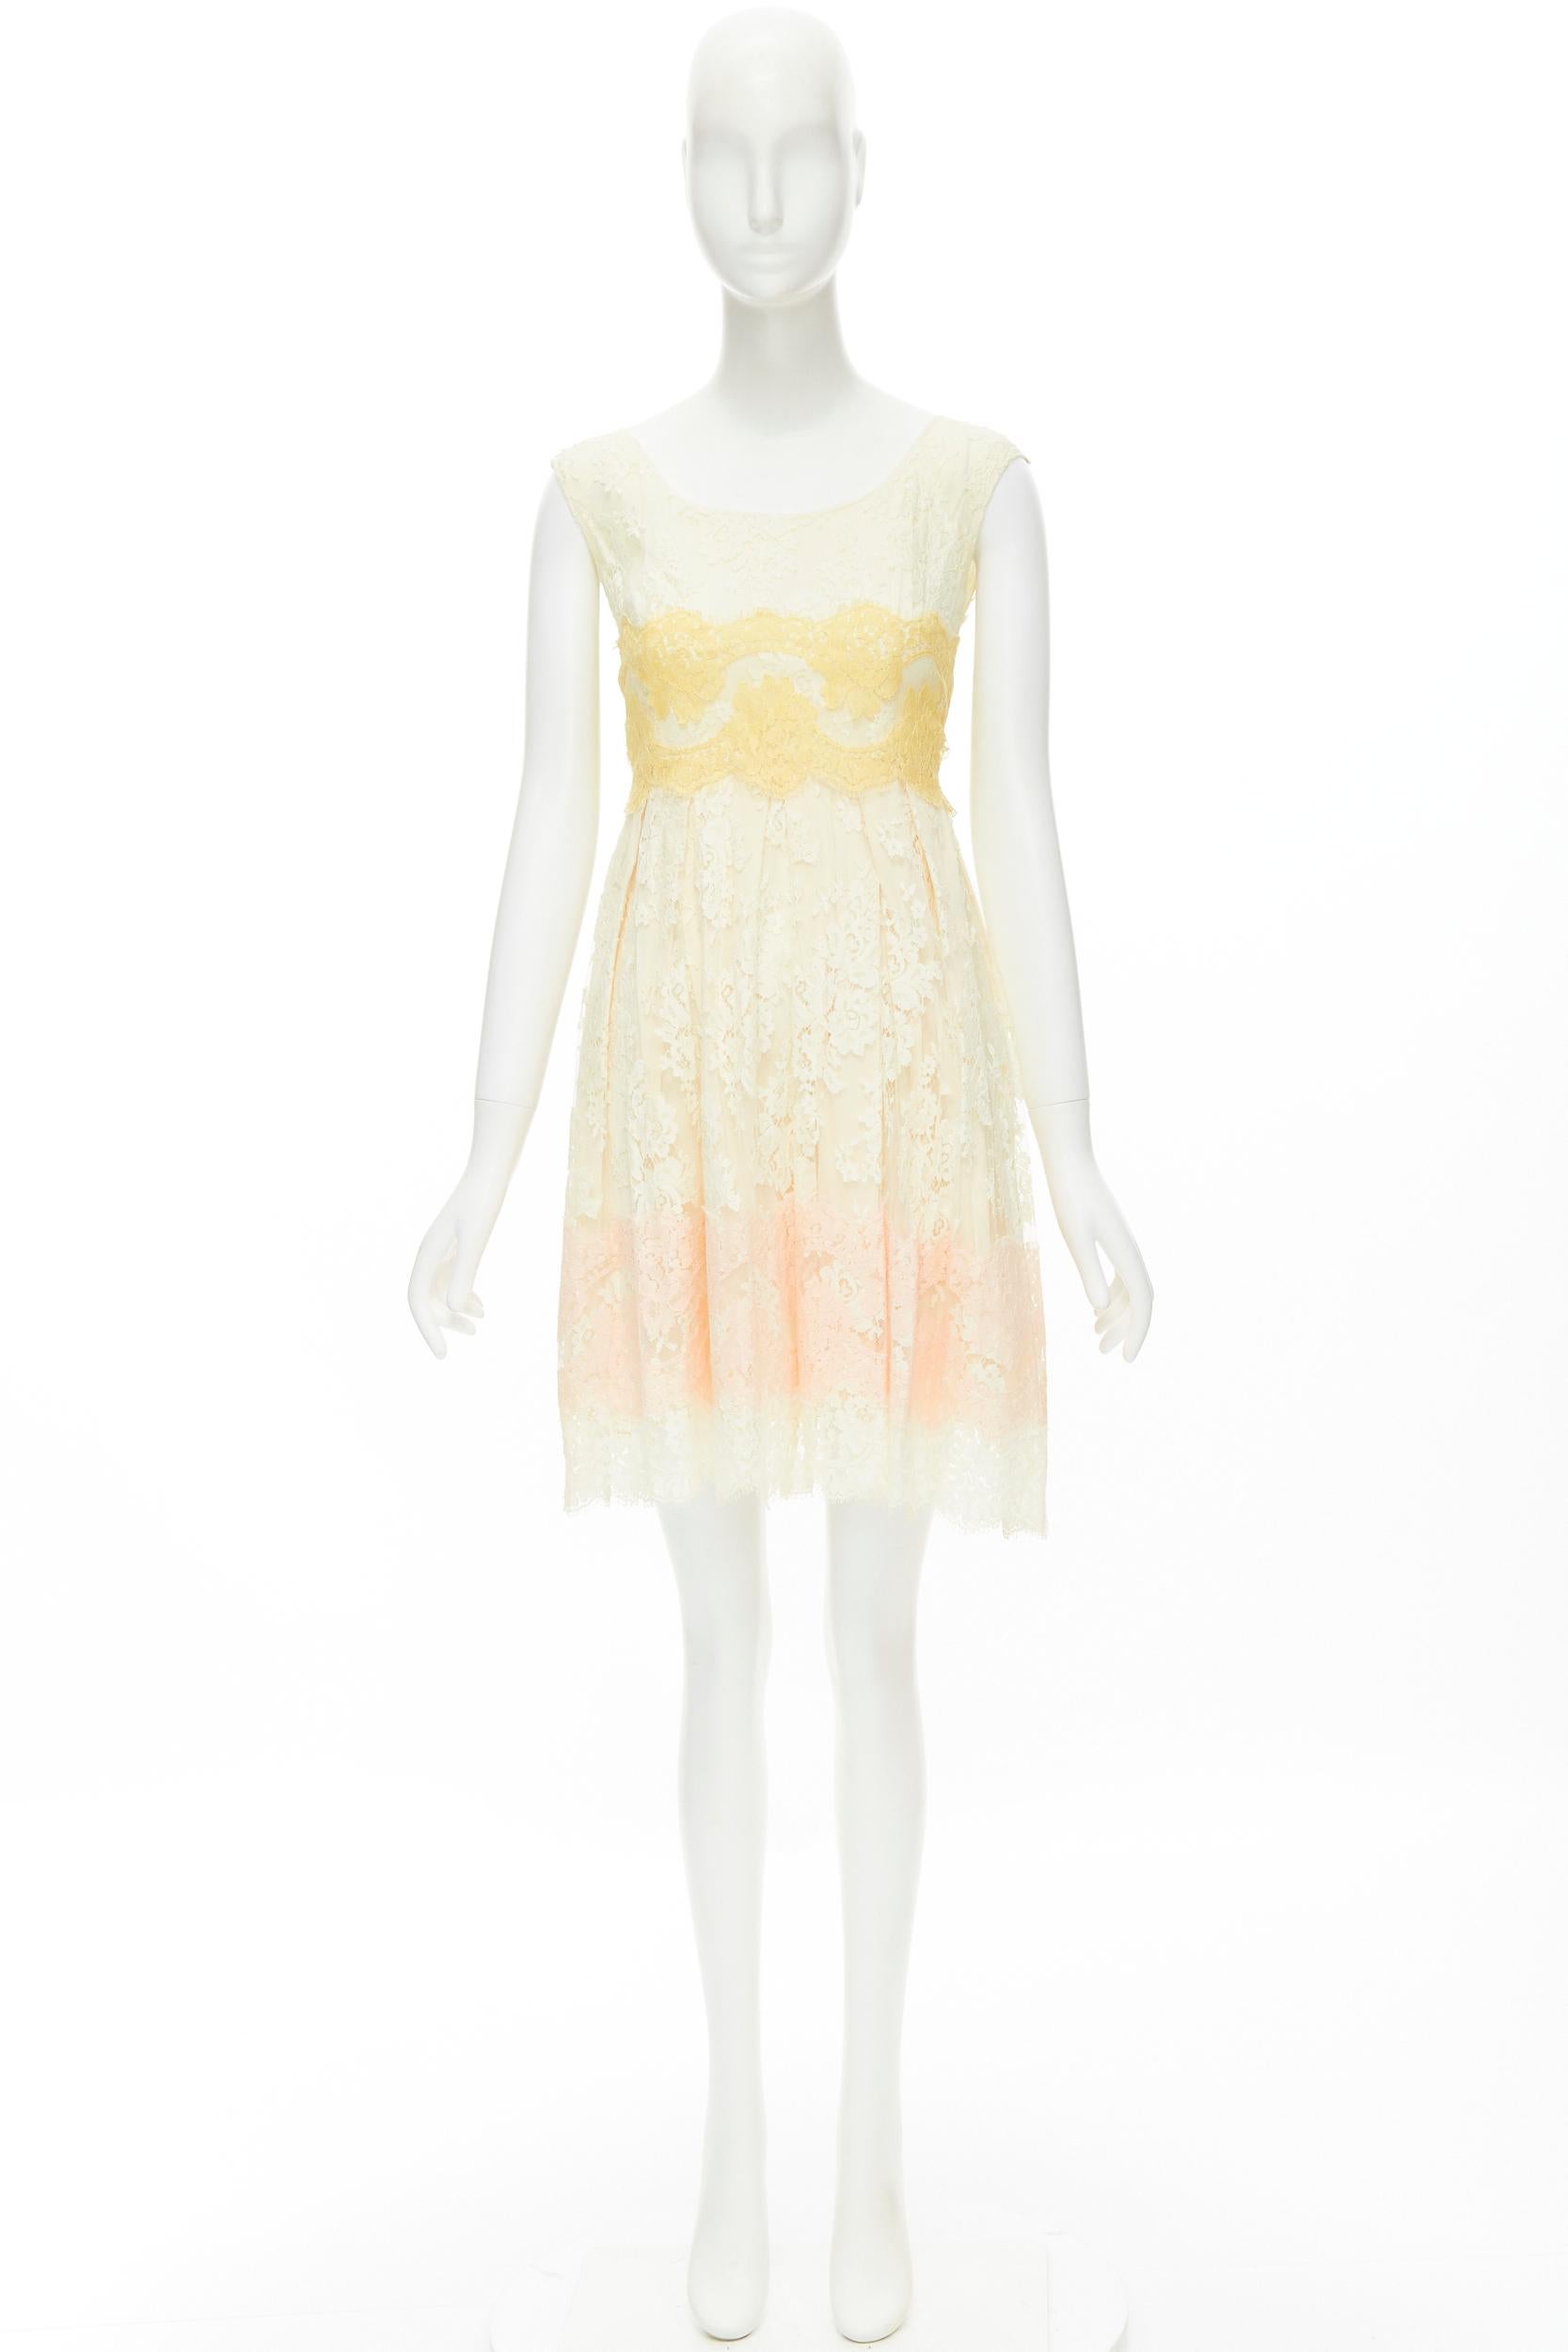 DOLCE GABBANA white pastel yellow pink lace fit flared cocktail dress IT36 XS 4